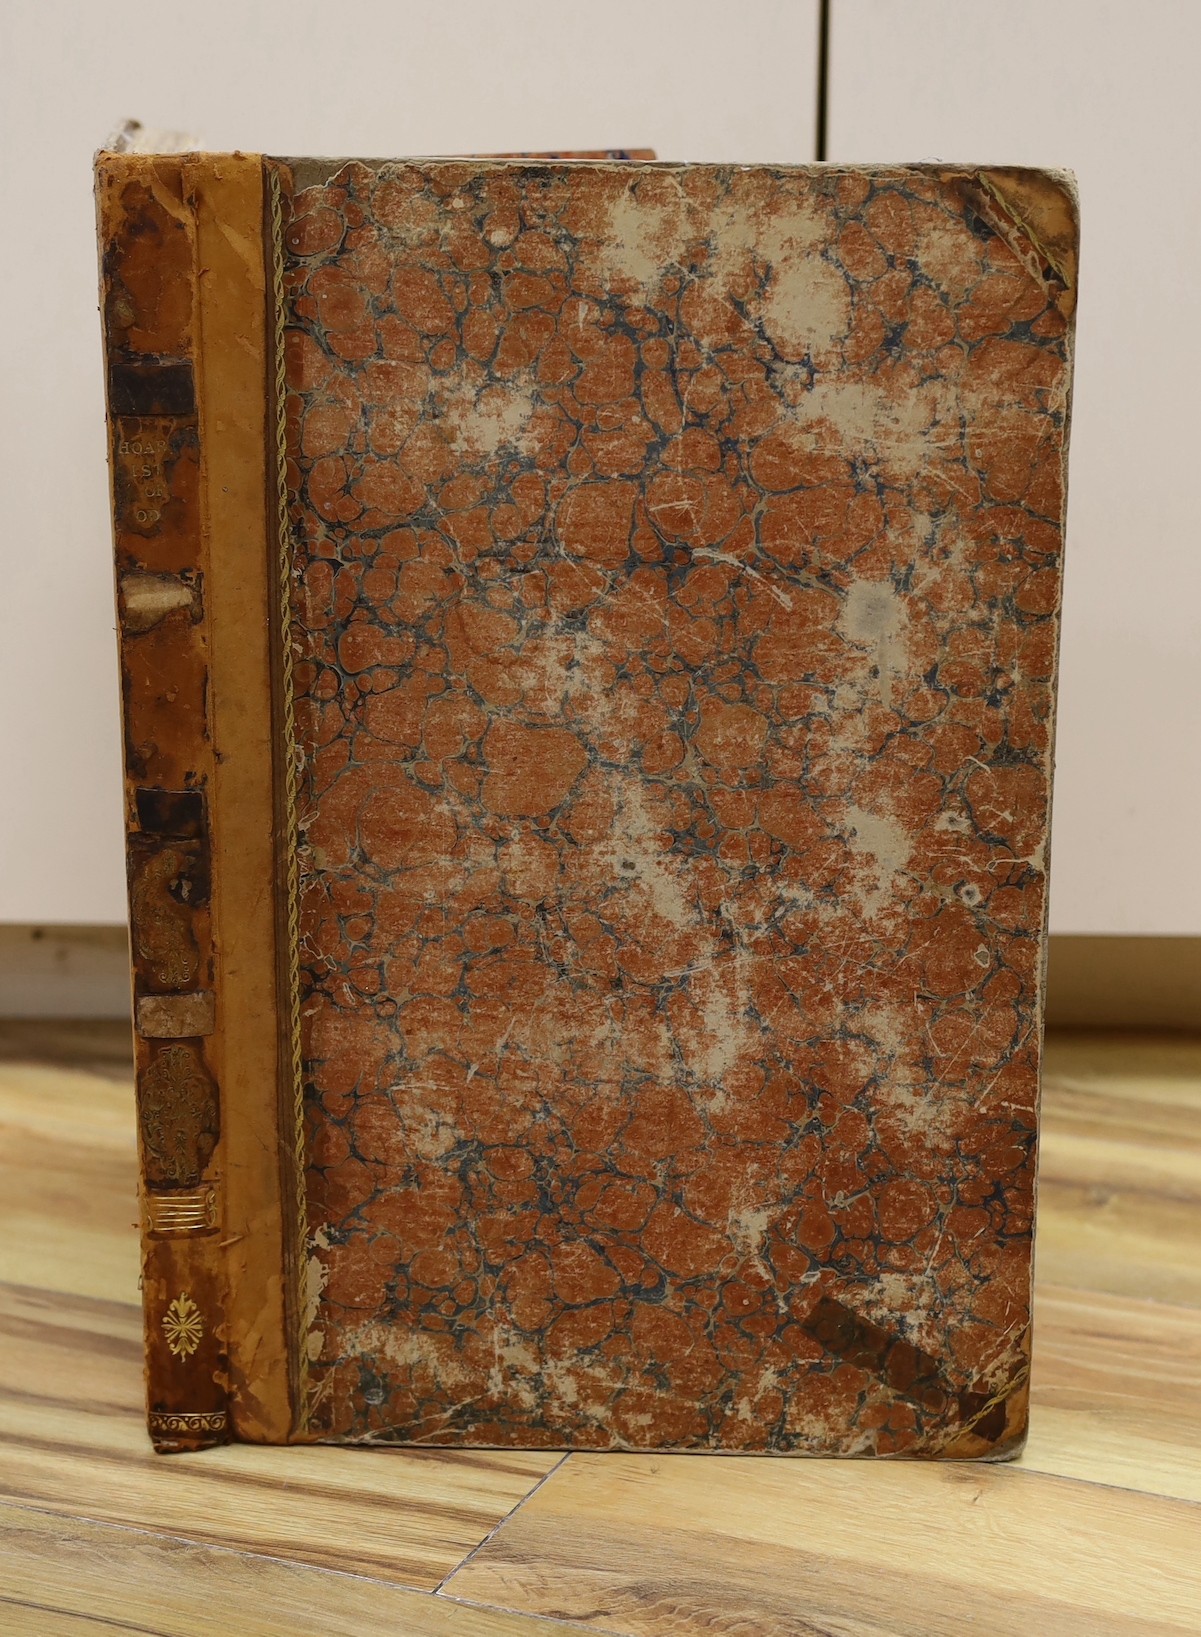 WILTSHIRE - Hoare, Richard Colt, Sir - The History of Modern Wiltshire - Hundreds of Everley, Ambresbury and Underditch, [covers Stonehenge], folio, half calf, with a double folding page map and 16 plates, boards scuffed